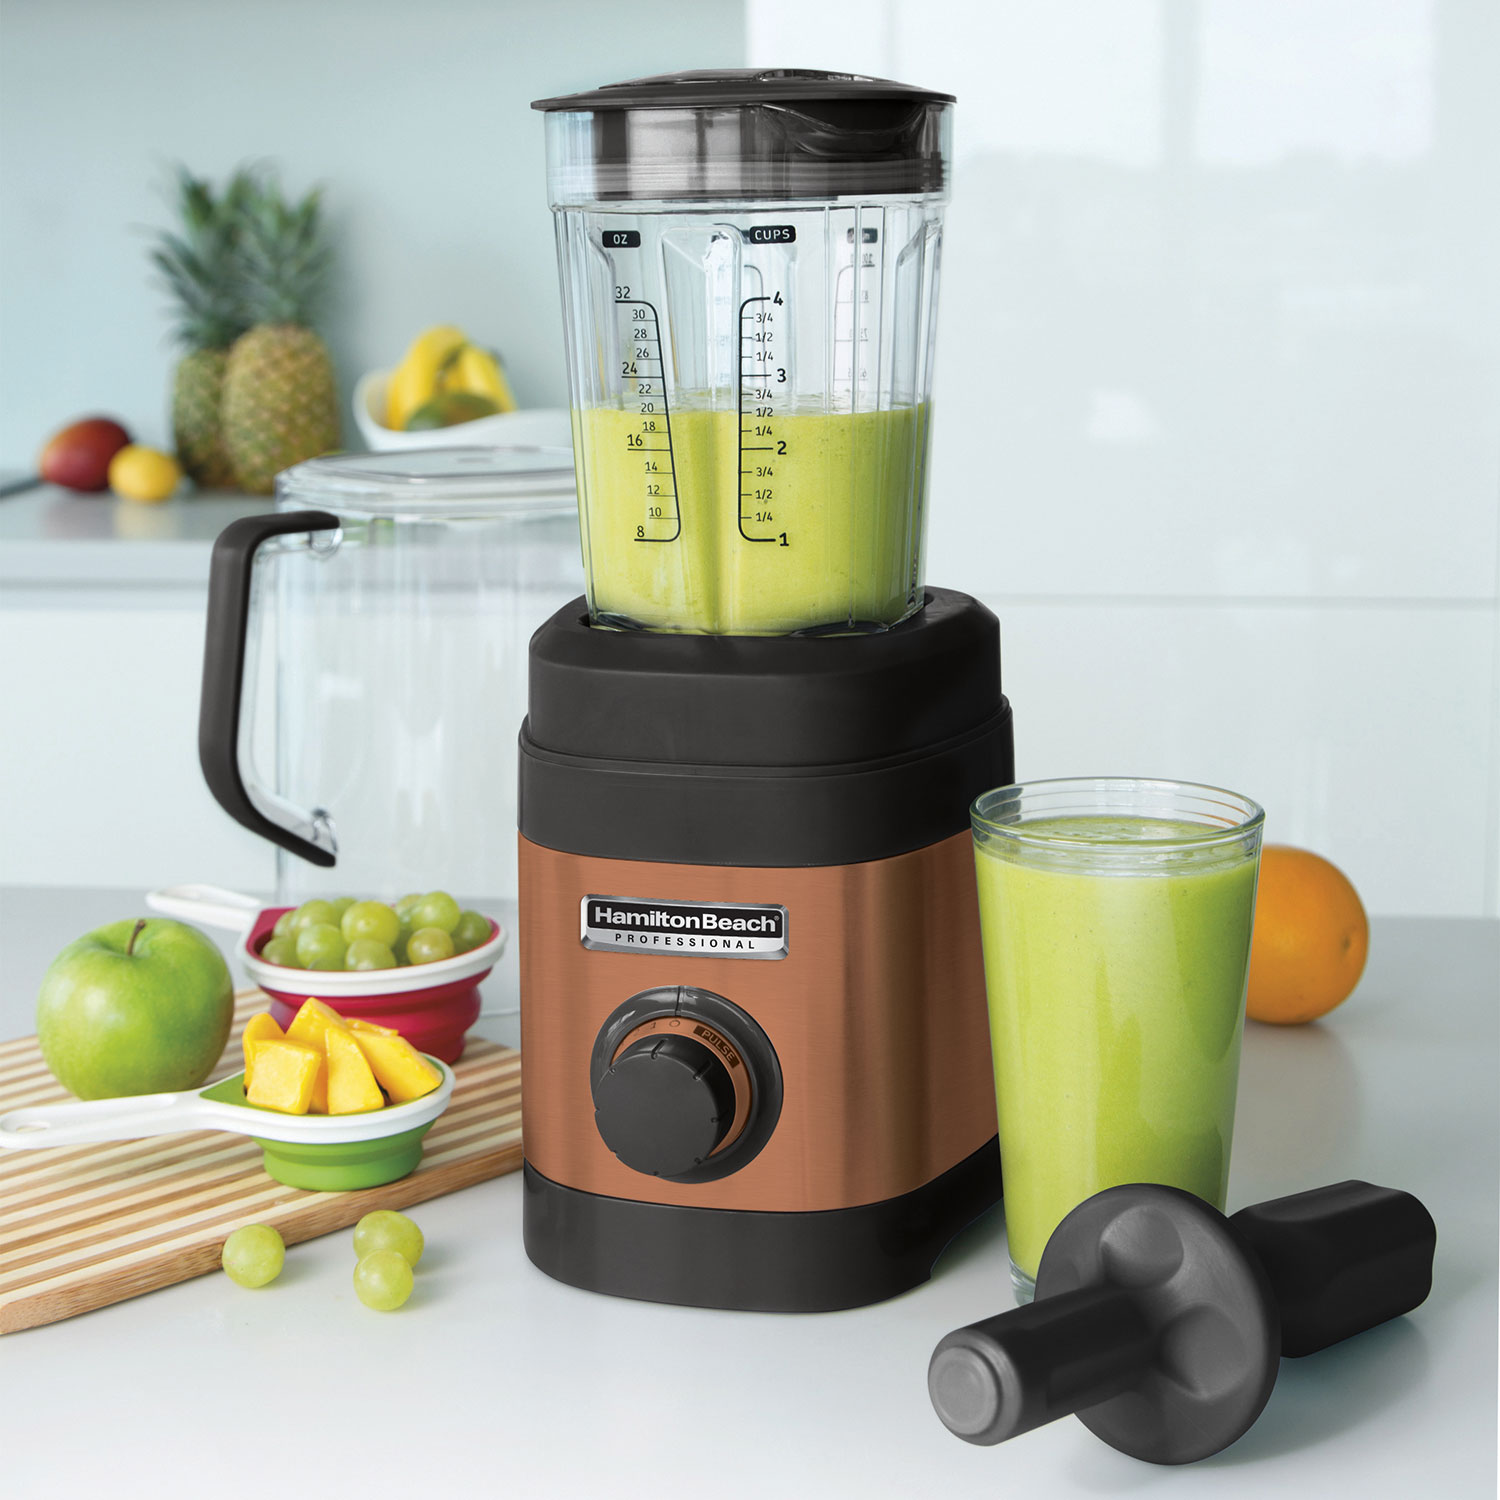 Professional High Performance Blender with Quiet Shield (Copper Finish) (58920-CN)